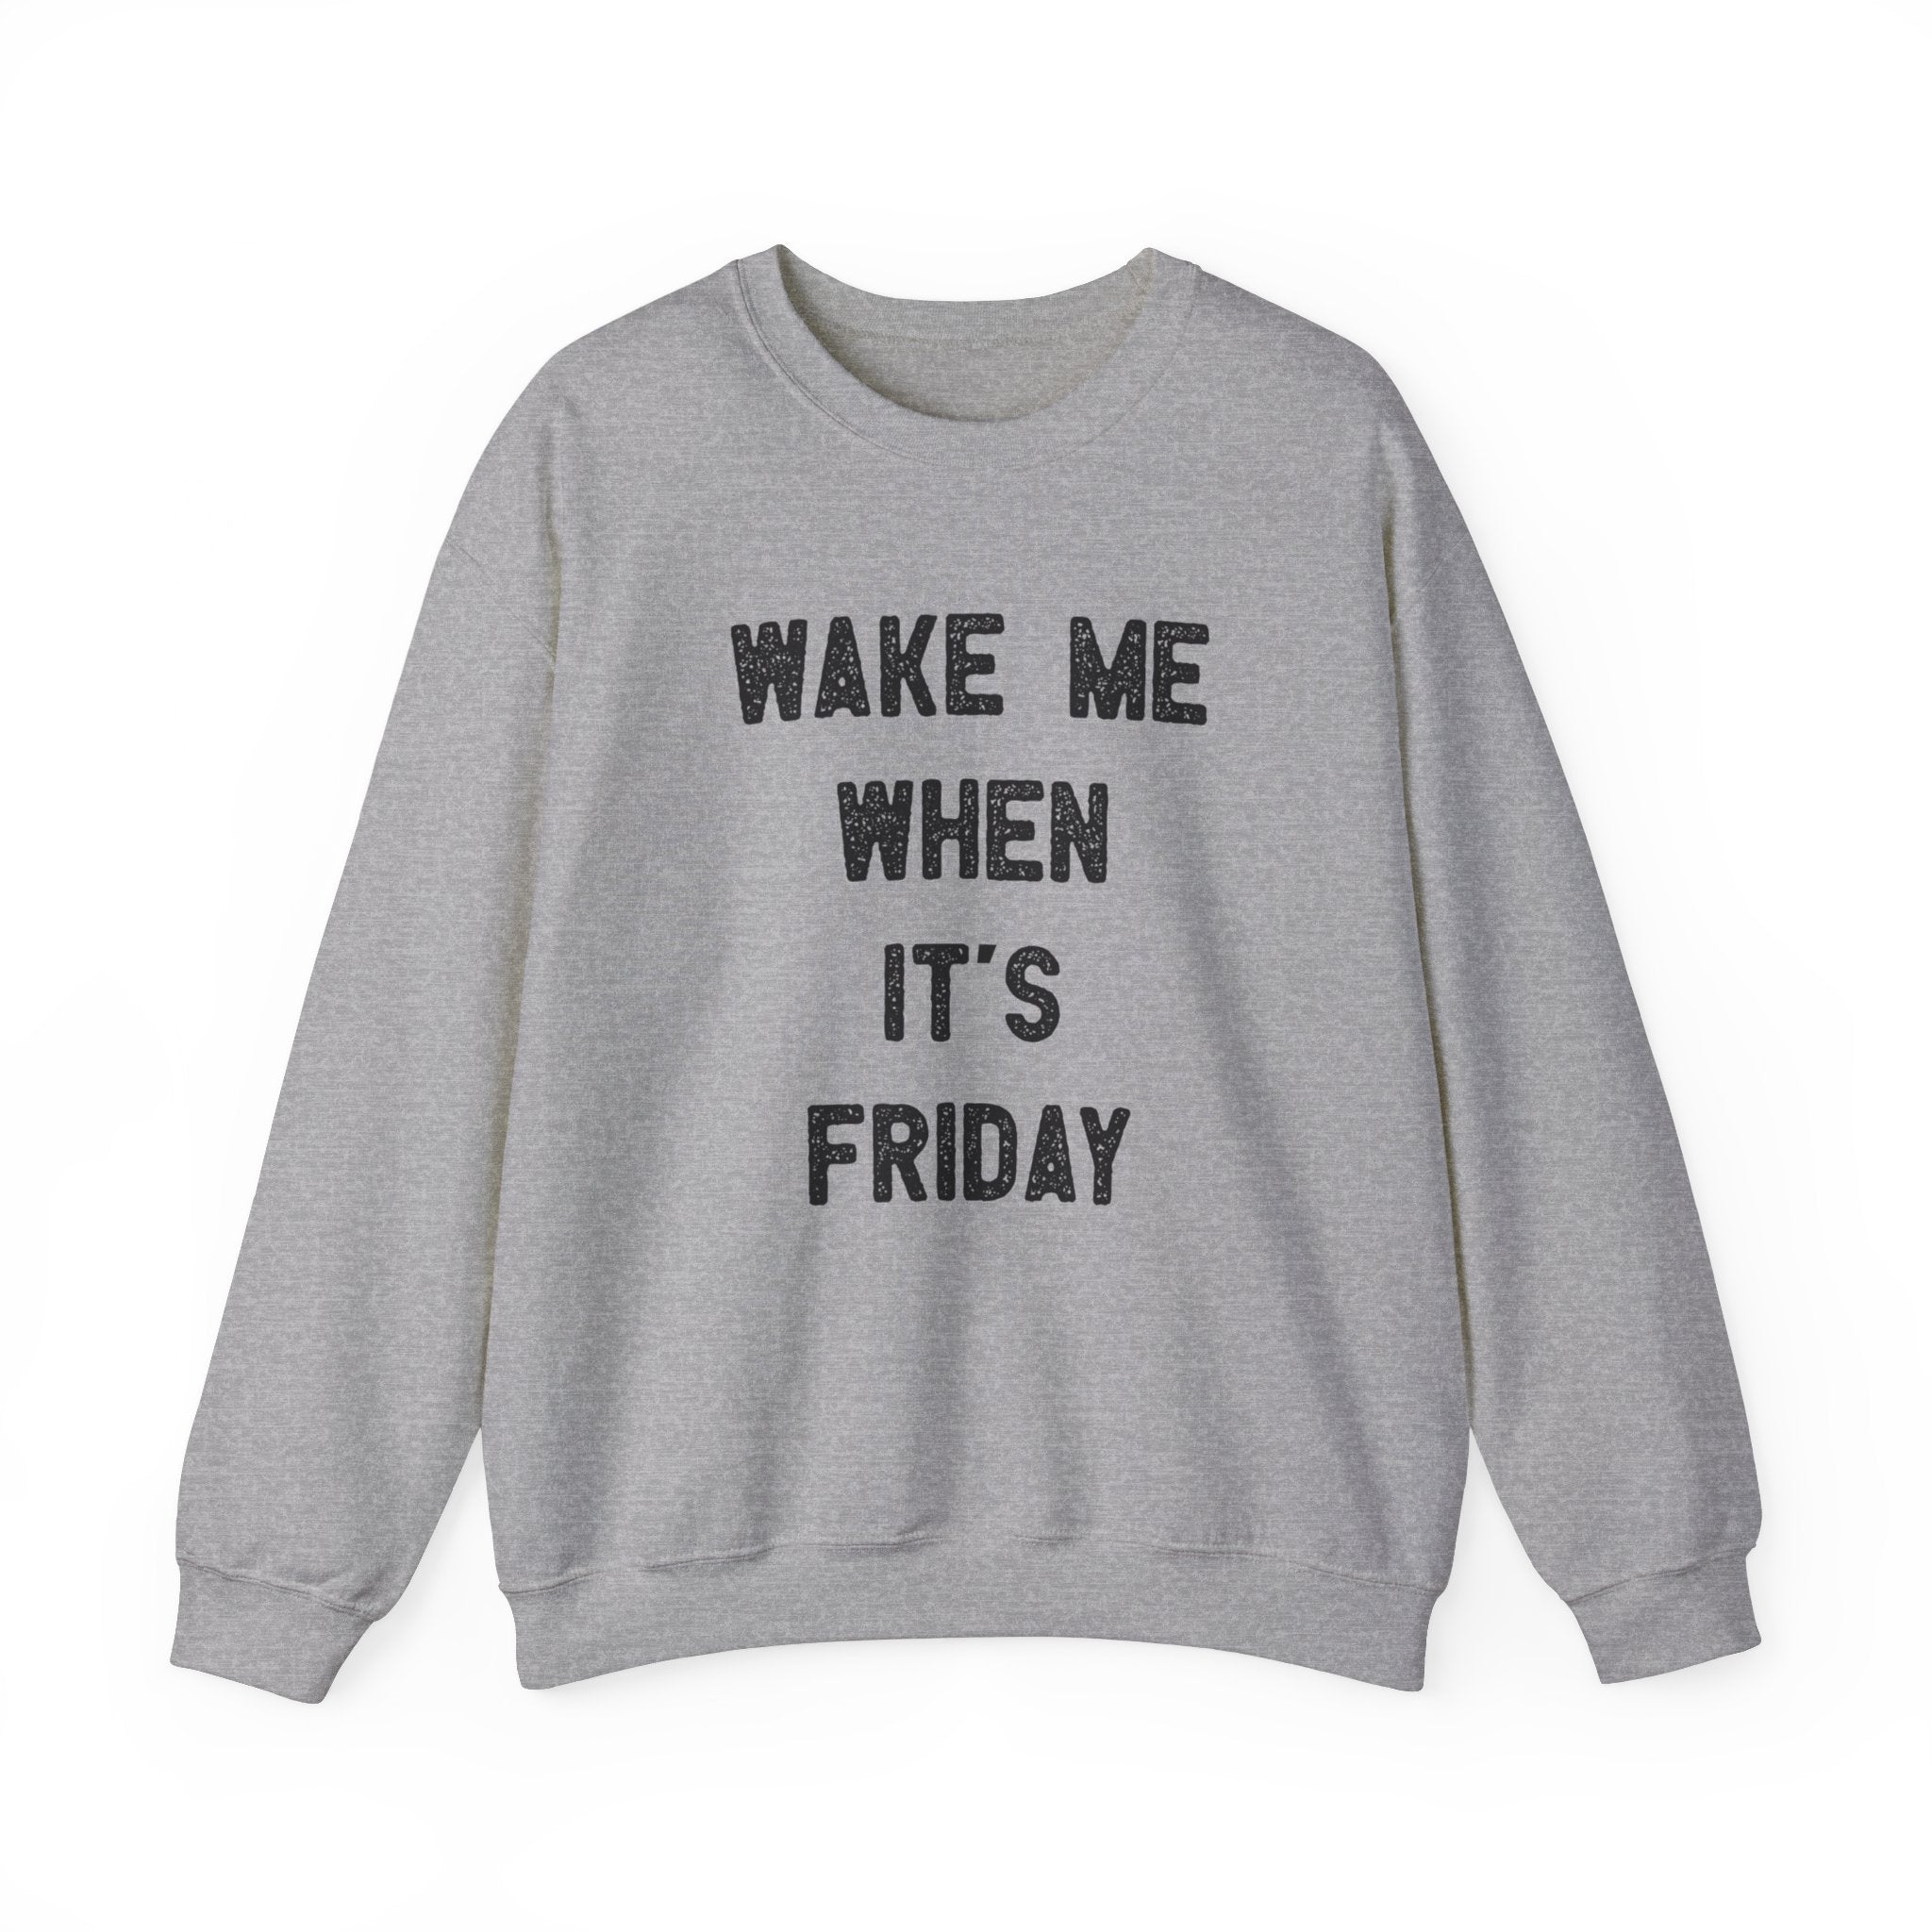 A stylish gray Wake Me When It's Friday - Sweatshirt with the text "WAKE ME WHEN IT'S FRIDAY" printed in black on the front, perfect for a cozy and casual look.